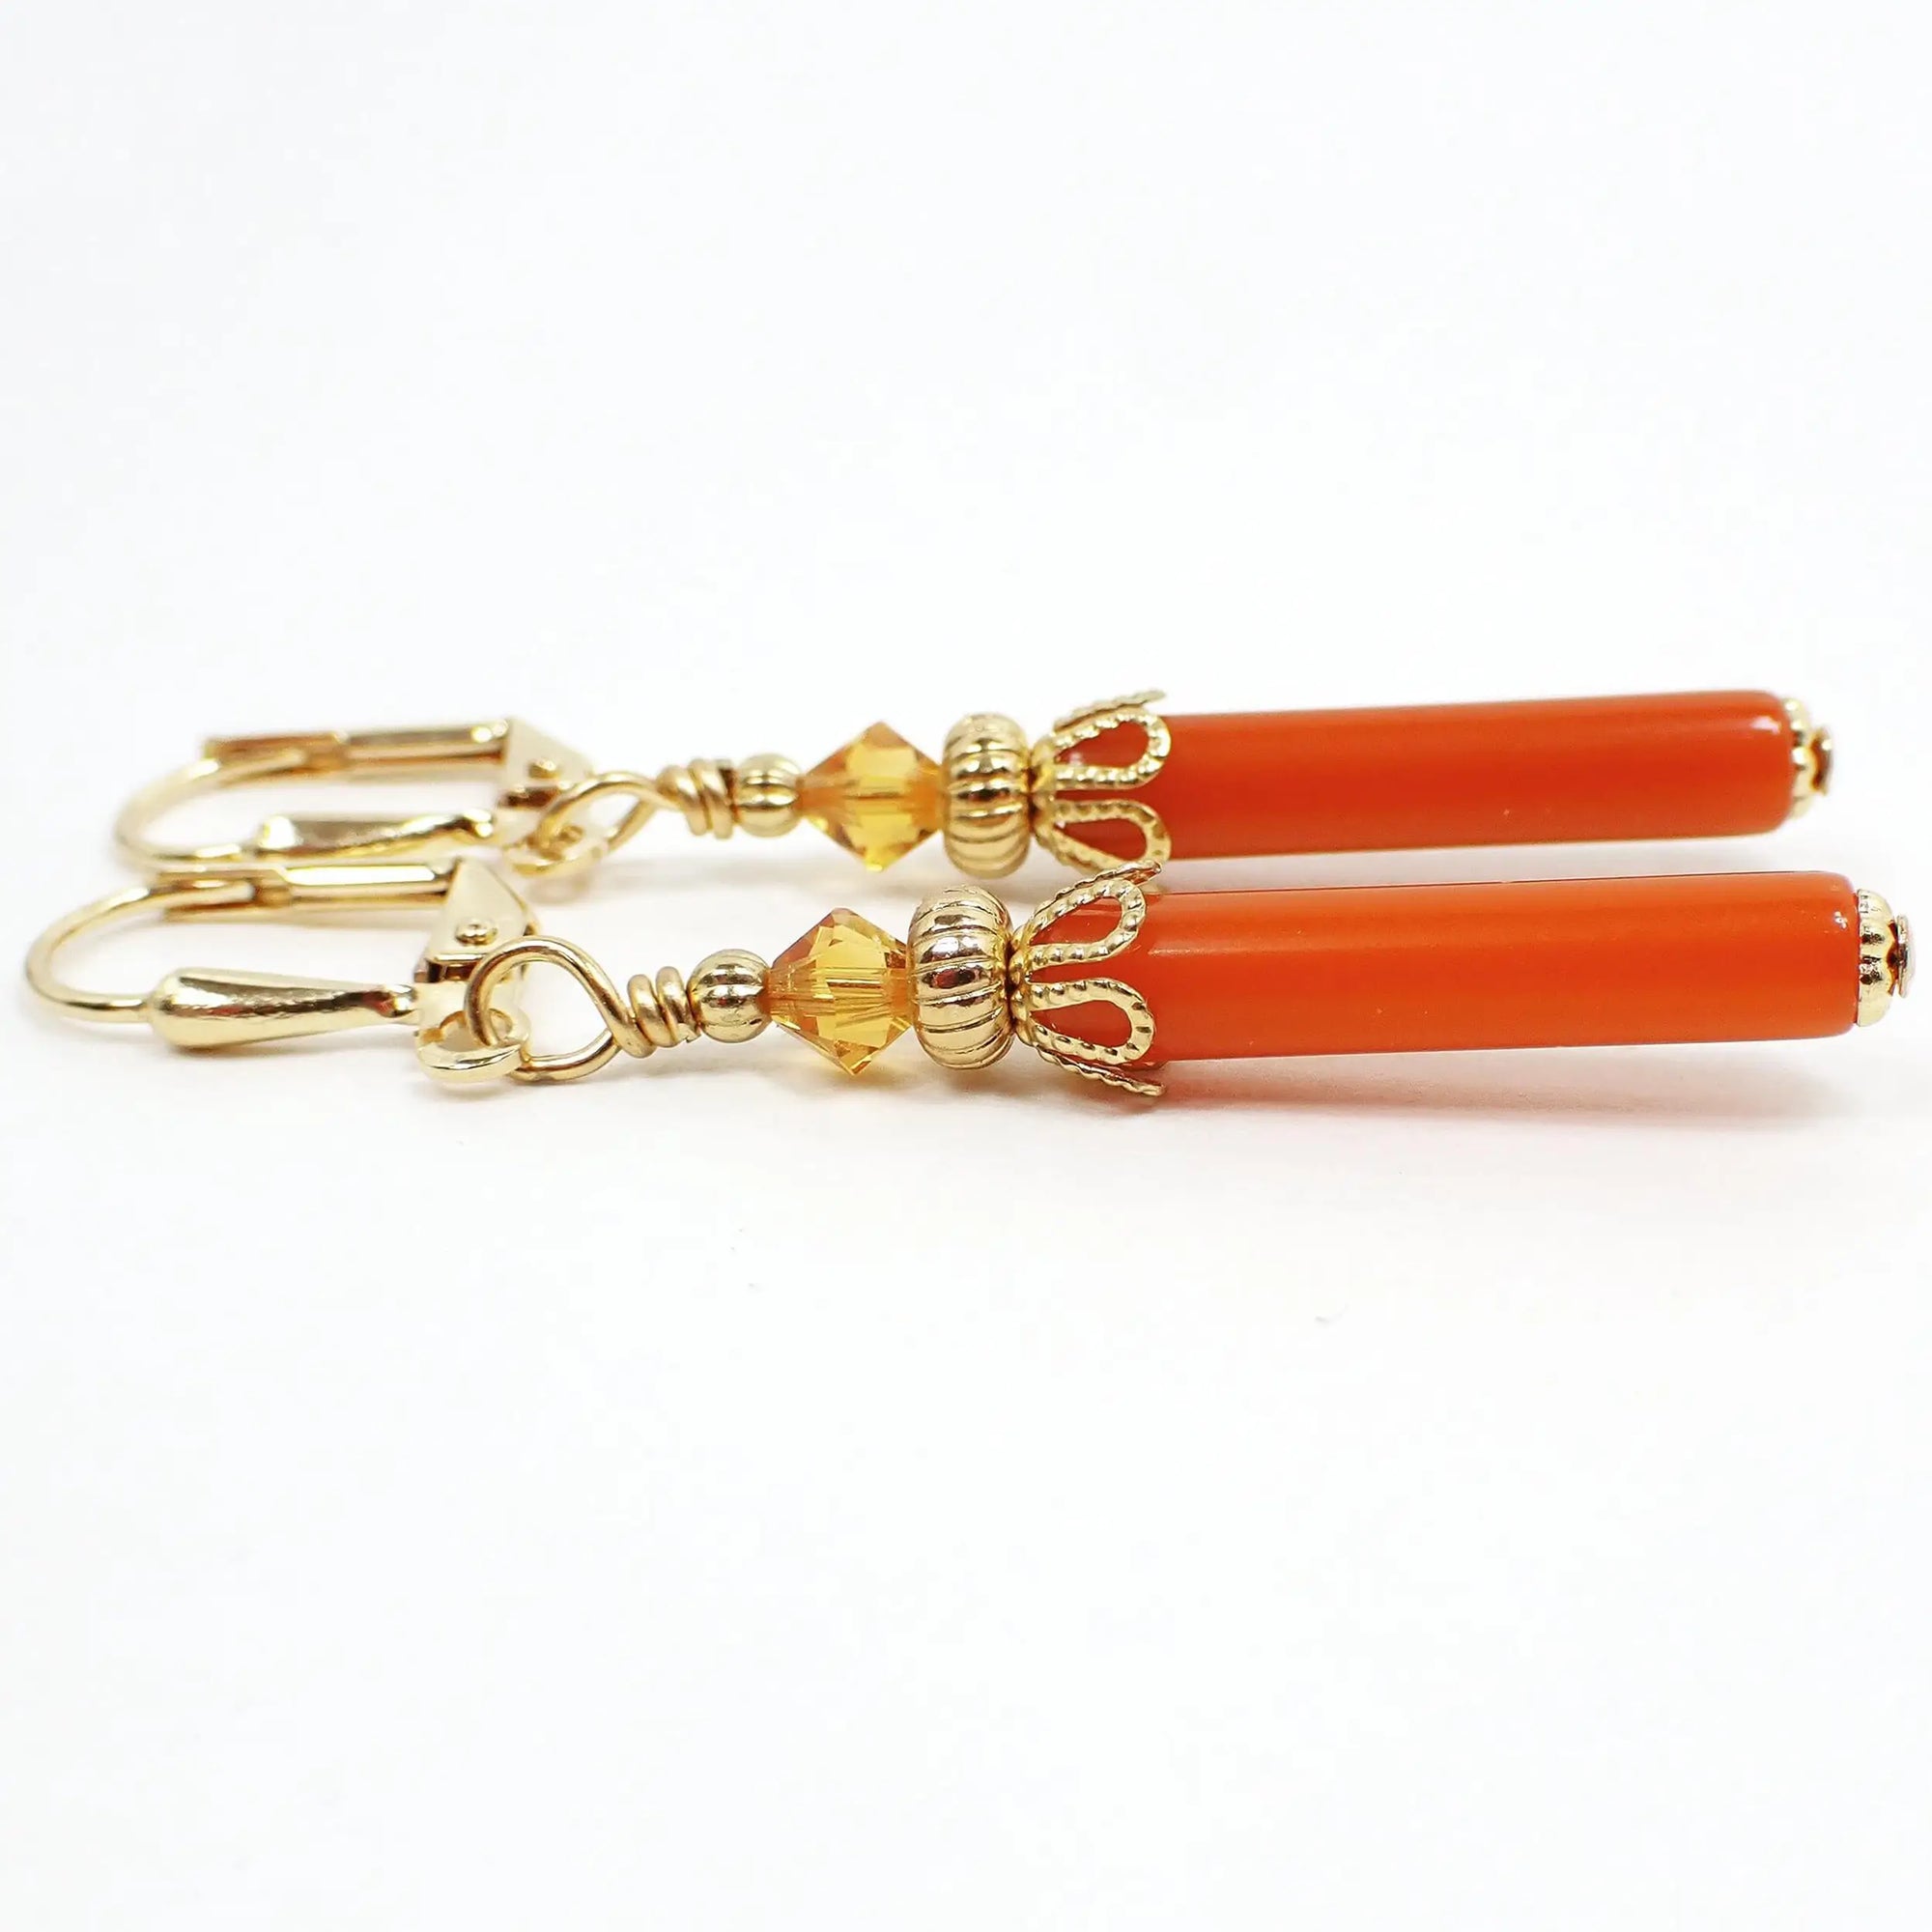 Side view of the handmade stick earrings made with vintage lucite beads. The metal is gold plated in color. There is a light orange faceted glass crystal bead at the top. The bottom beads are thin tube stick beads in a dark orange color lucite.